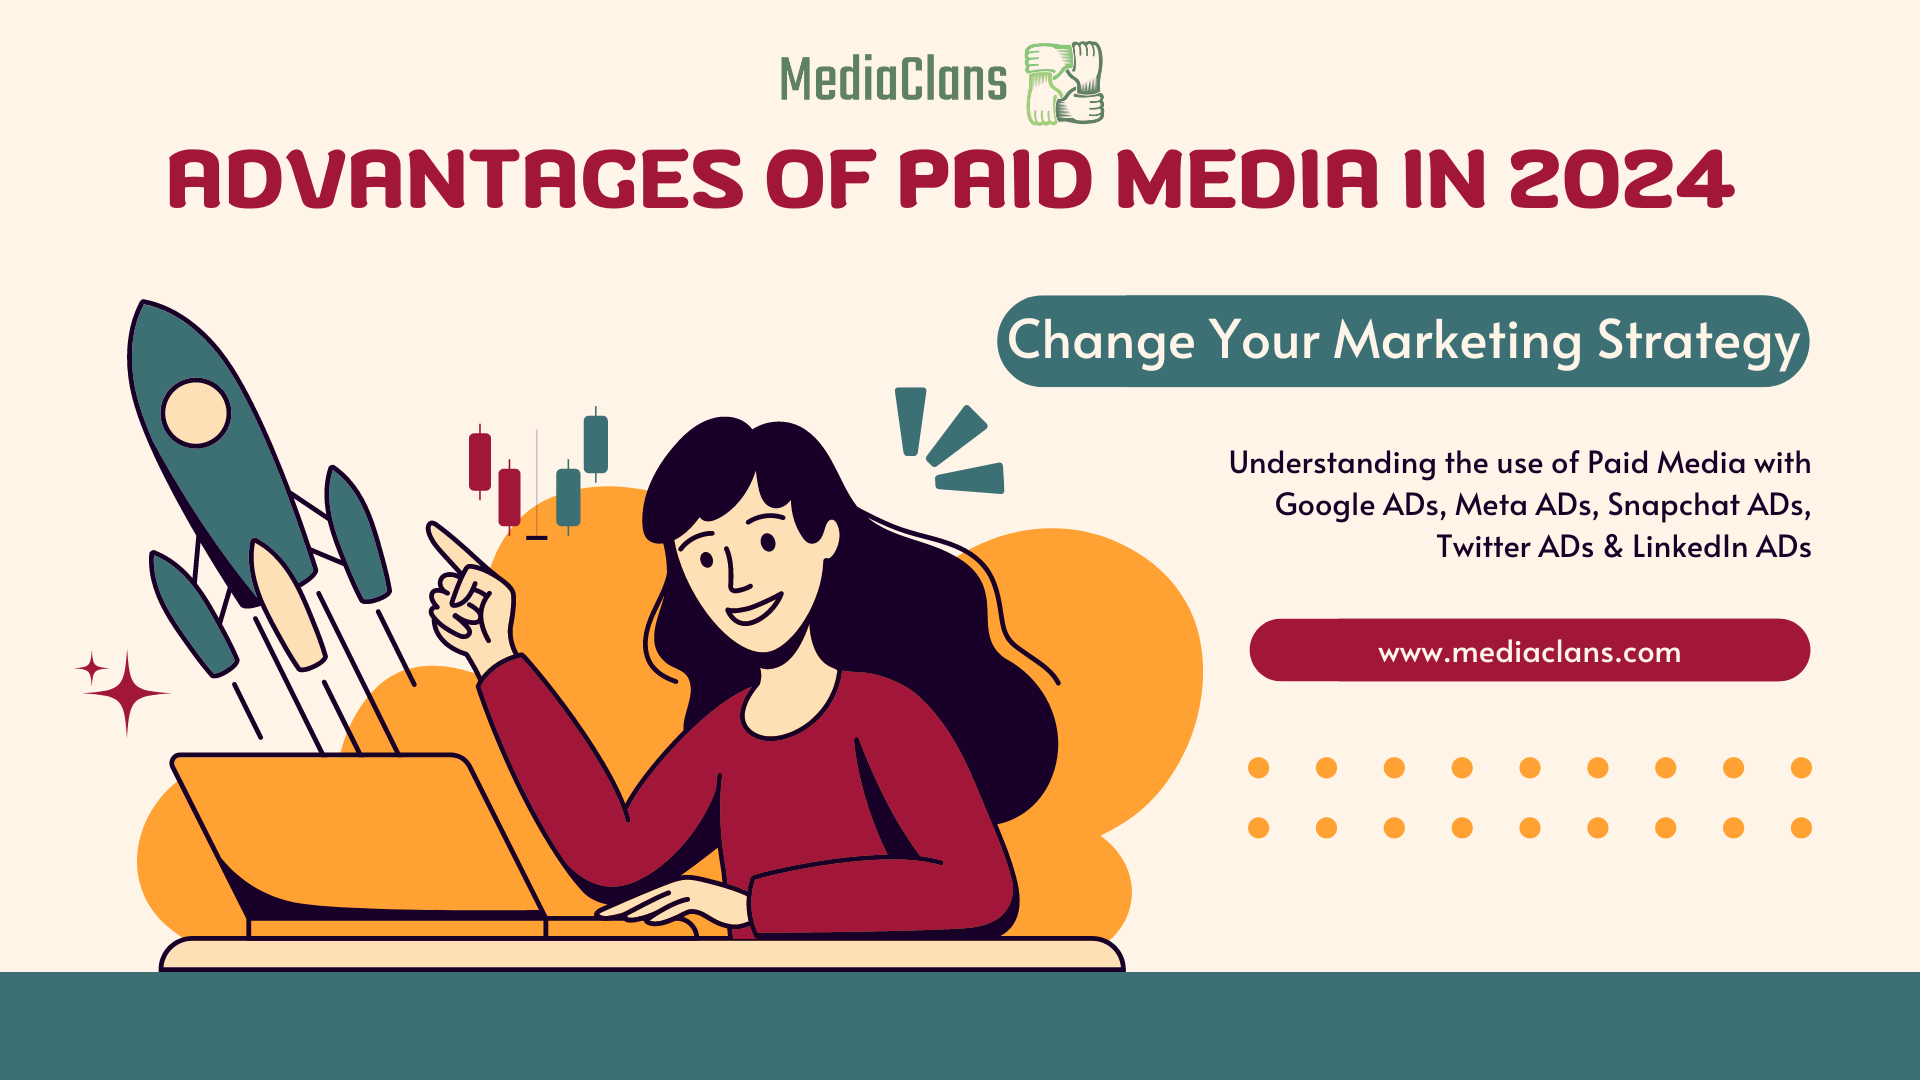 Advantages of paid media in 2024